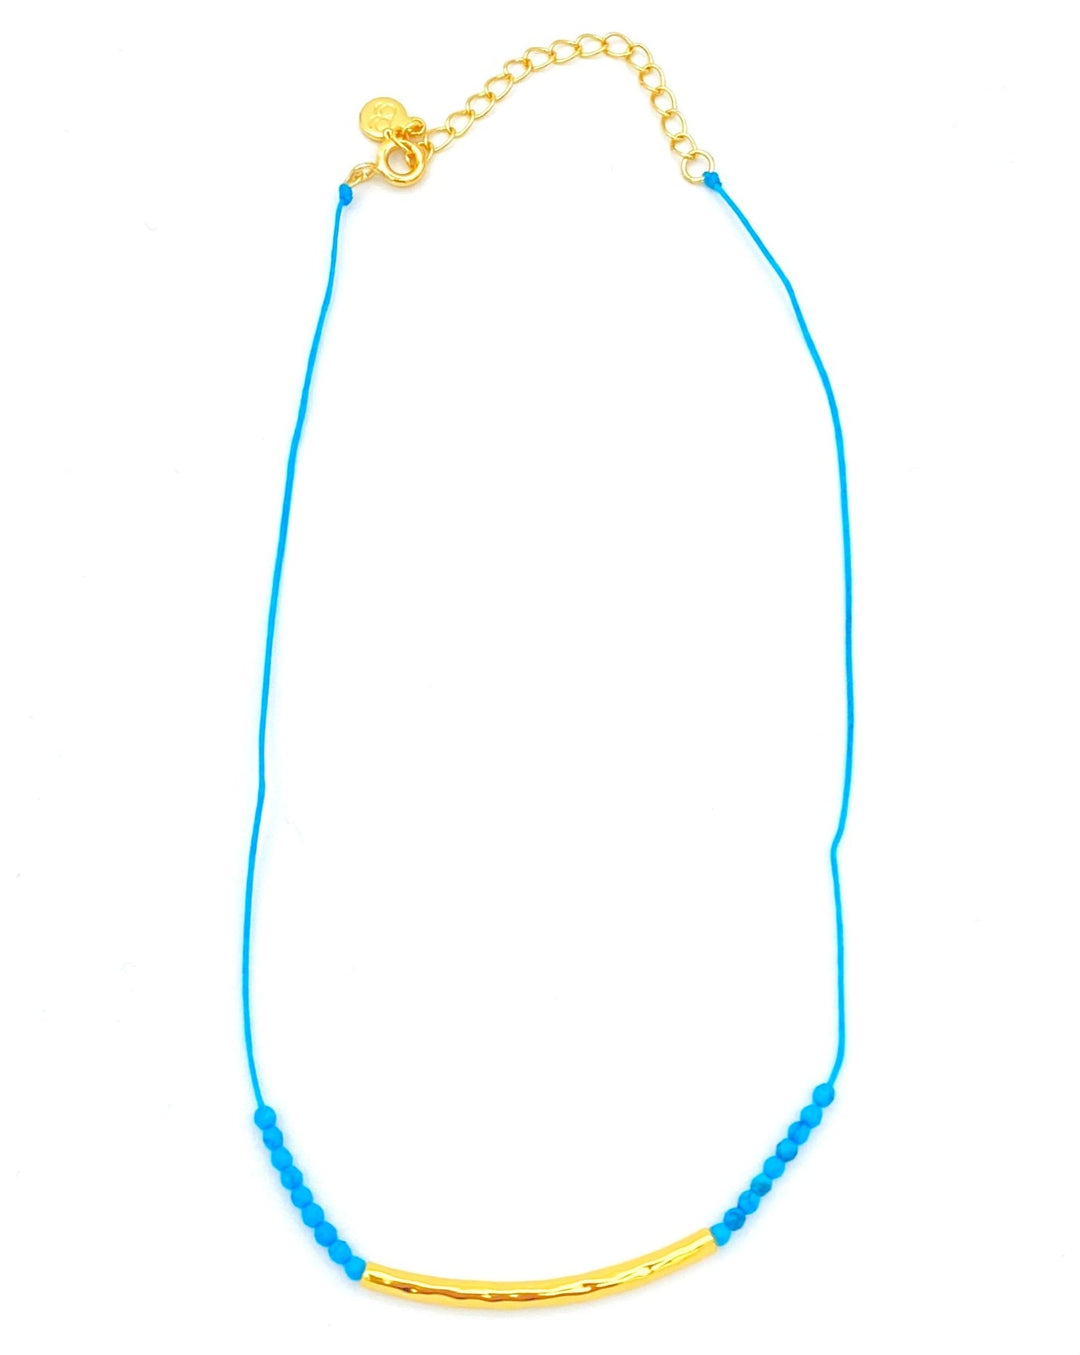 Turquoise Beaded and Gold Choker Necklace